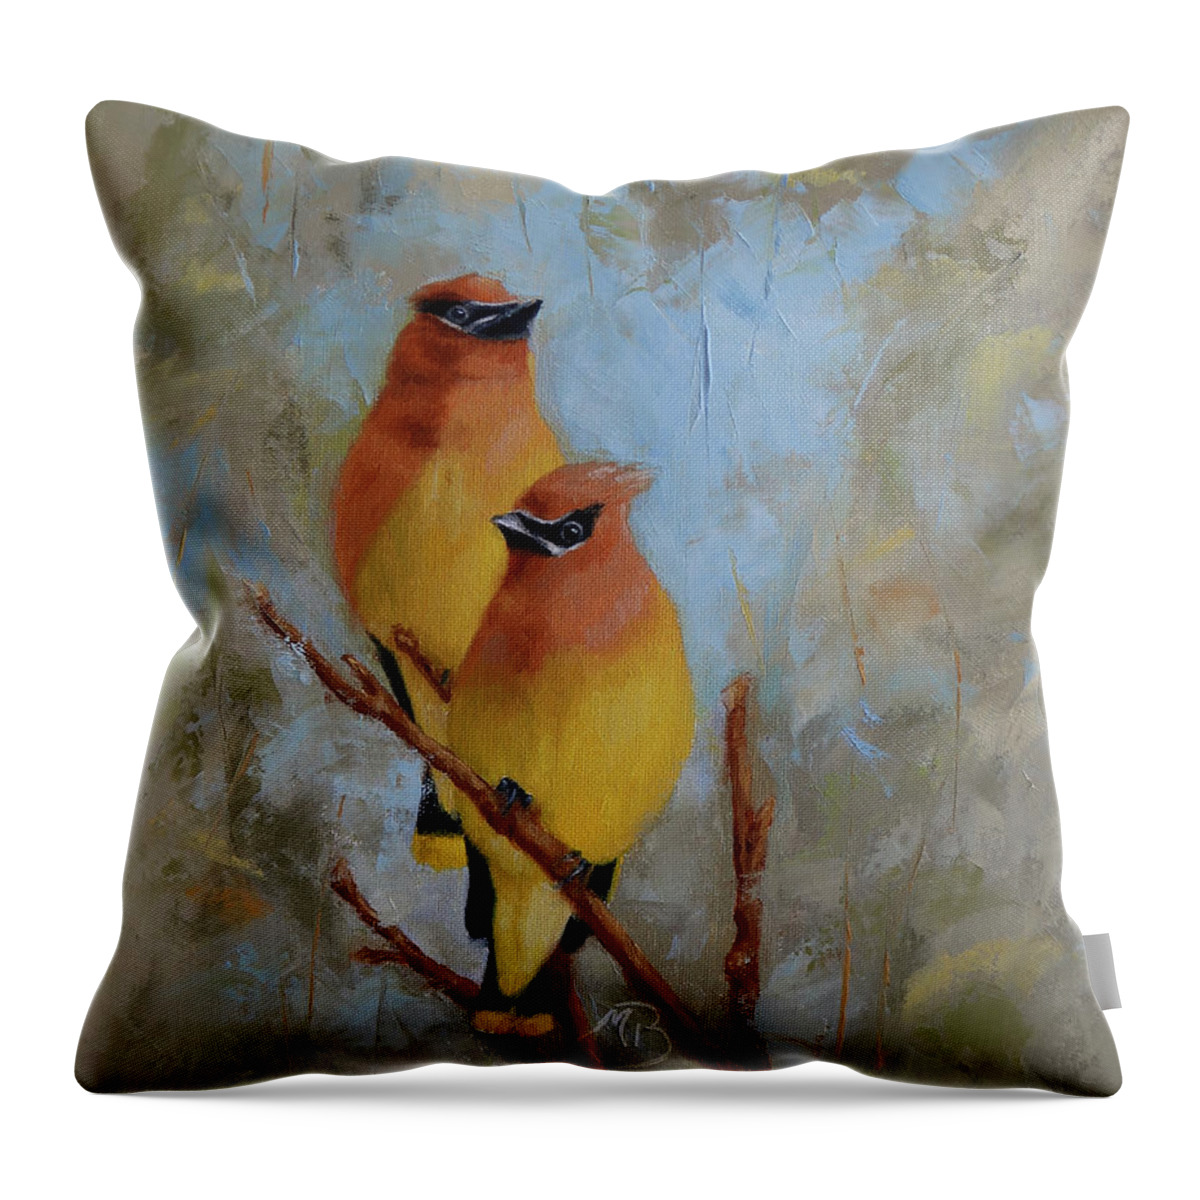 Wildlife Art Throw Pillow featuring the painting Cedar Waxwings by Monica Burnette